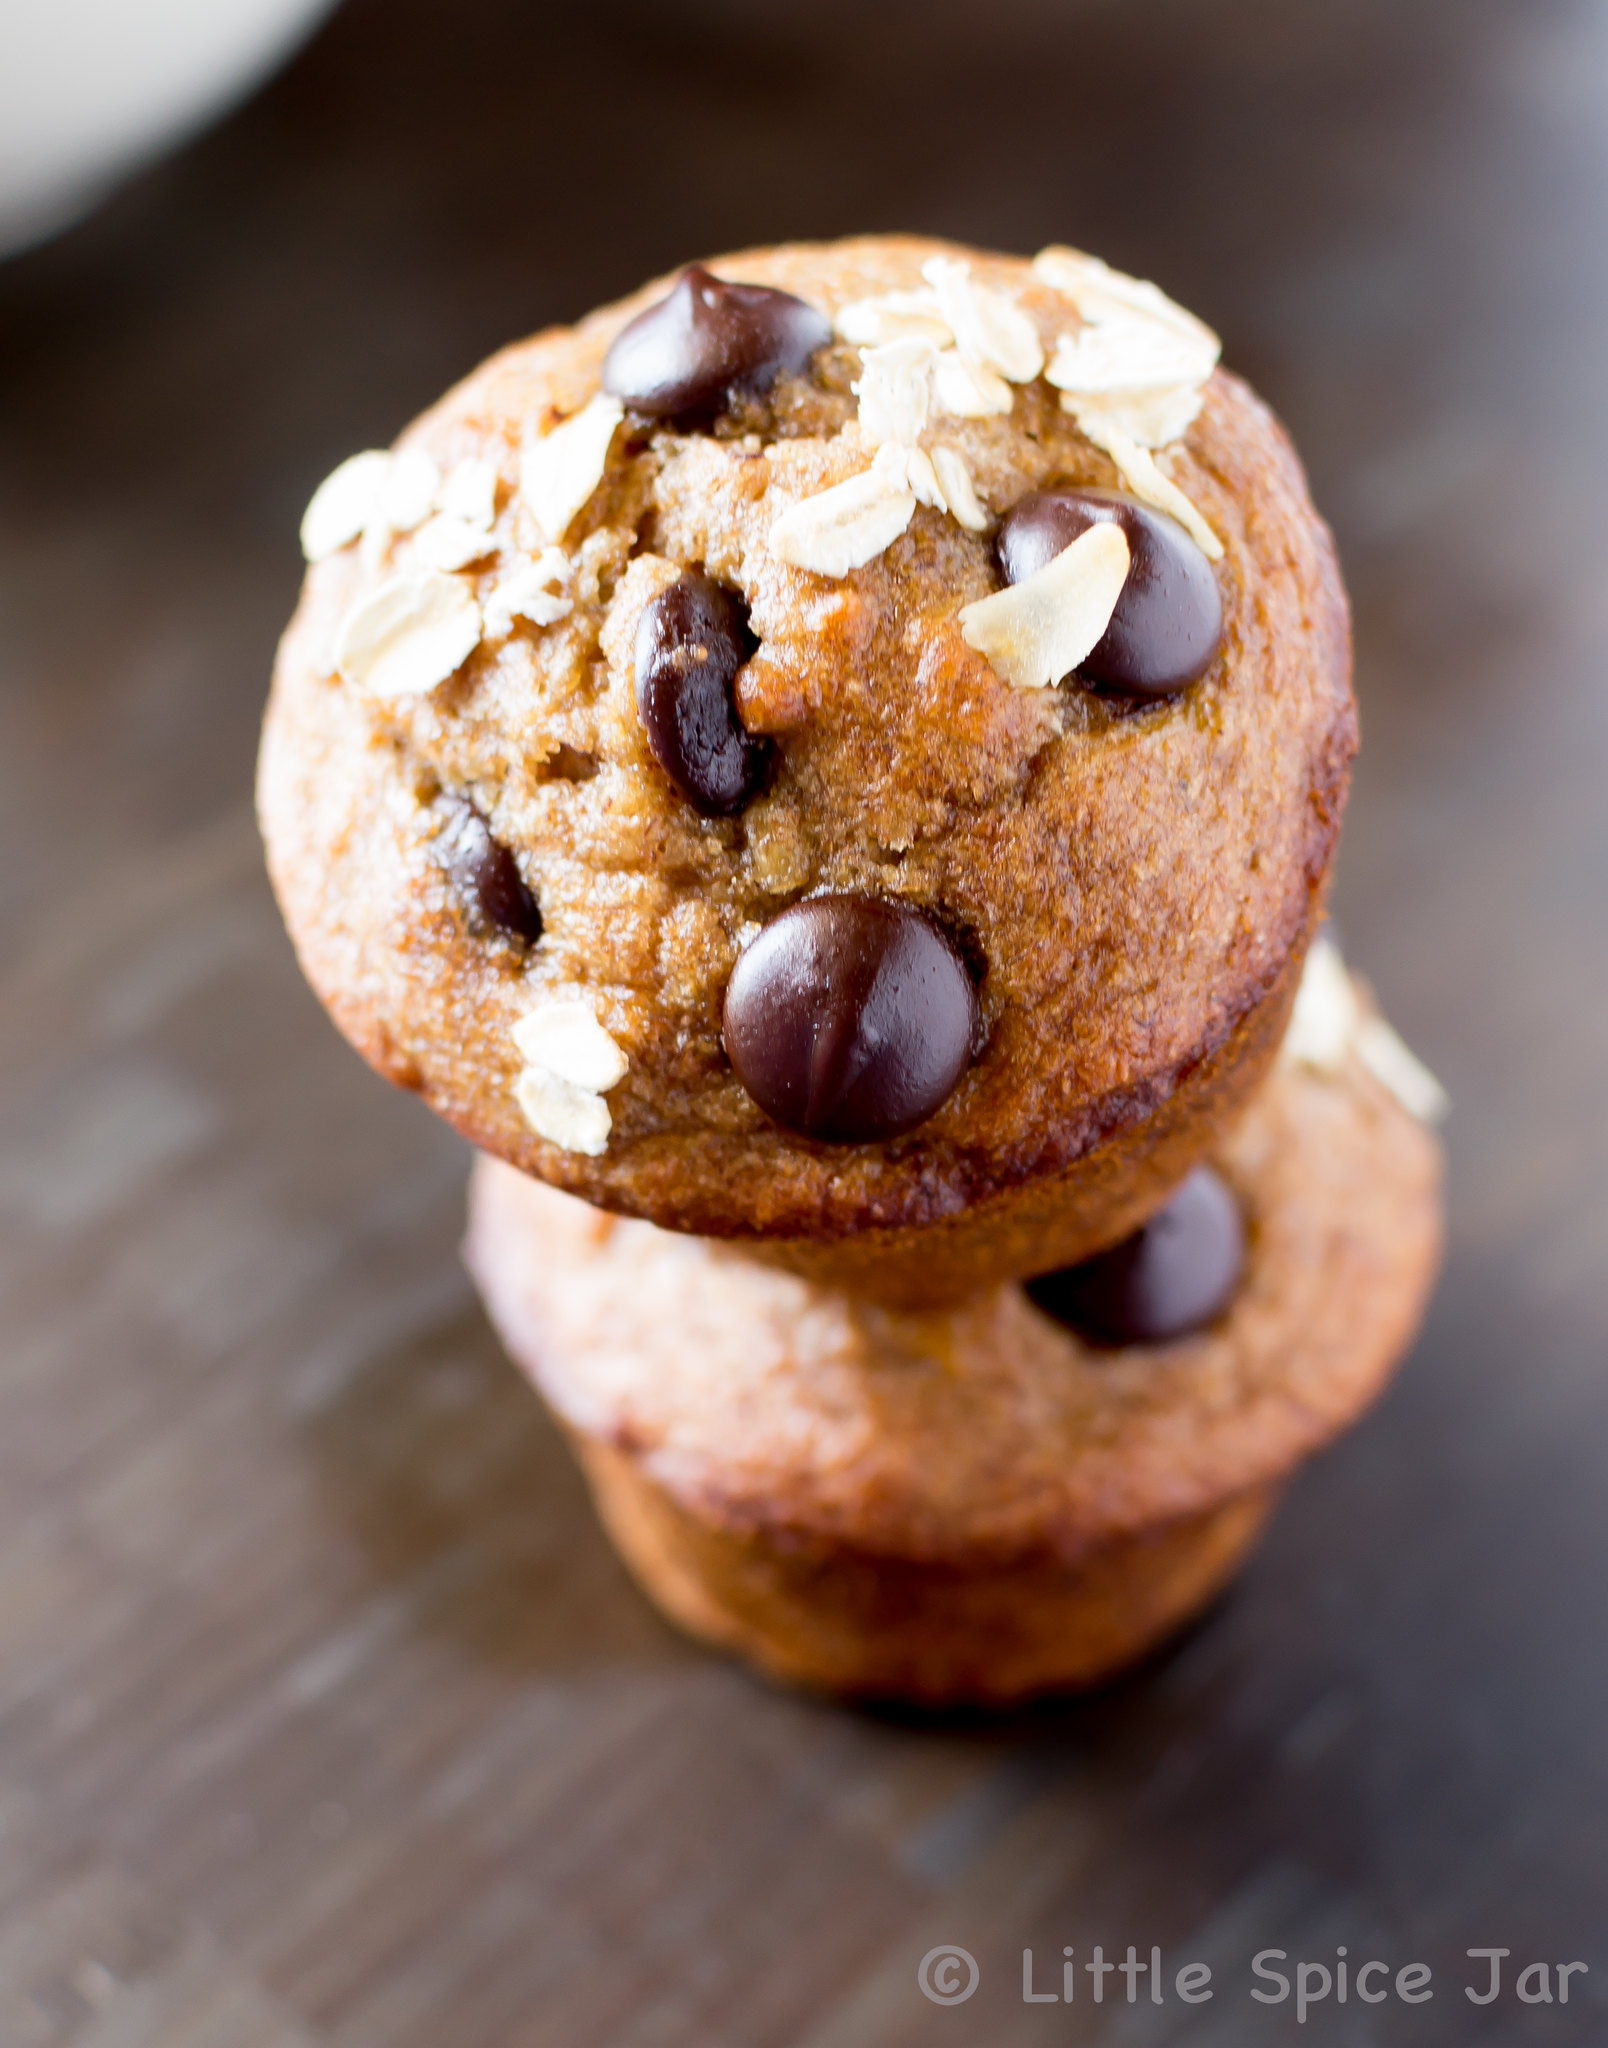 stack of two chocolate chip banana muffins showing oats and chips